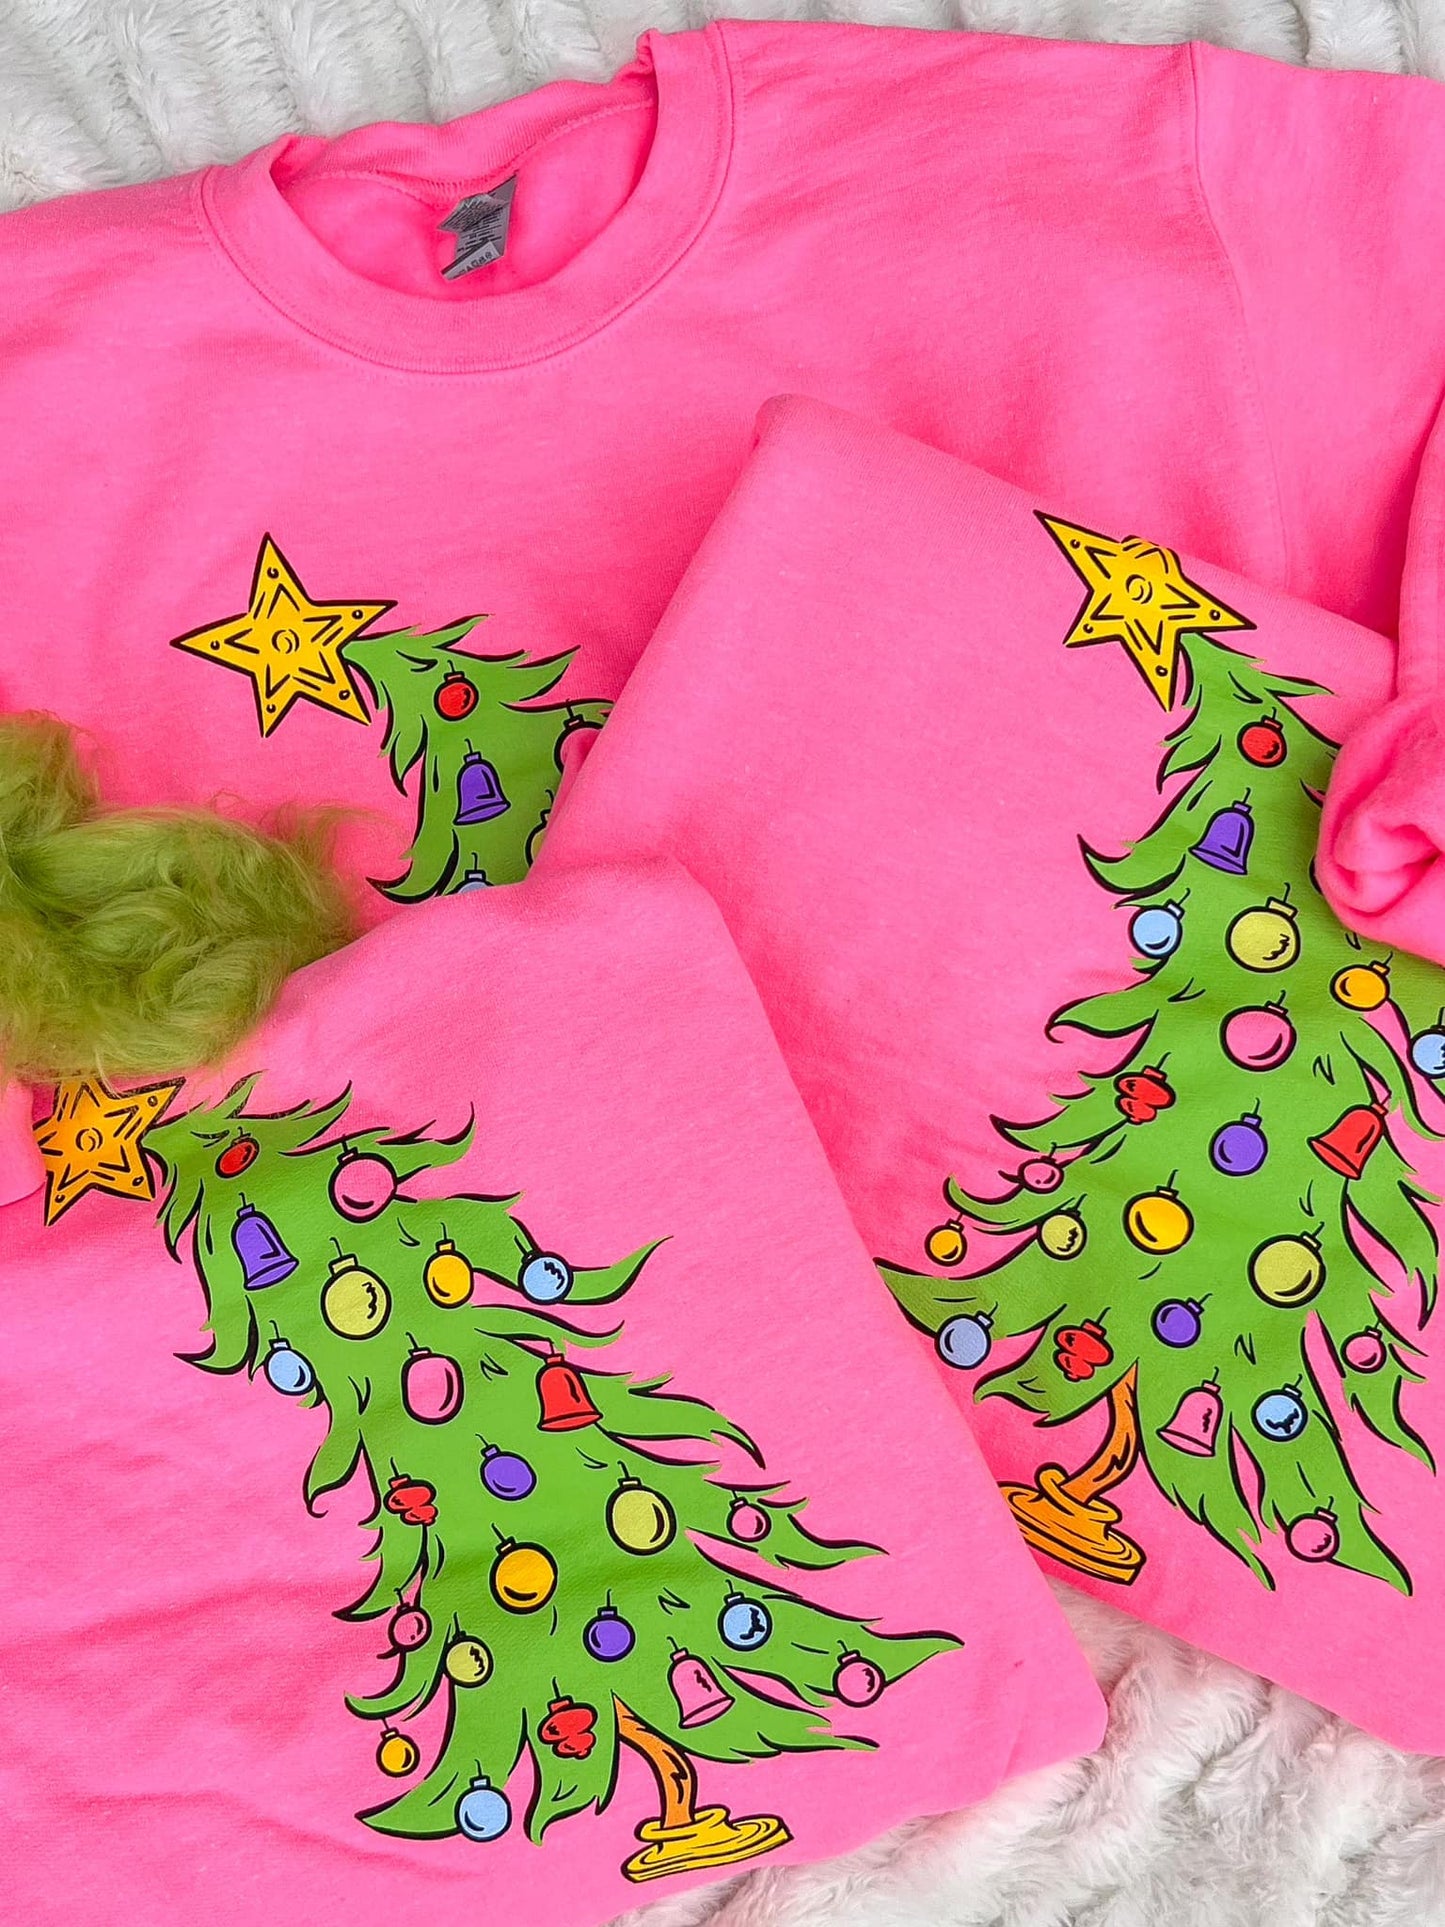 NEW - Christmas Tree Sweatshirt in HOT PINK - Available in Curvy!